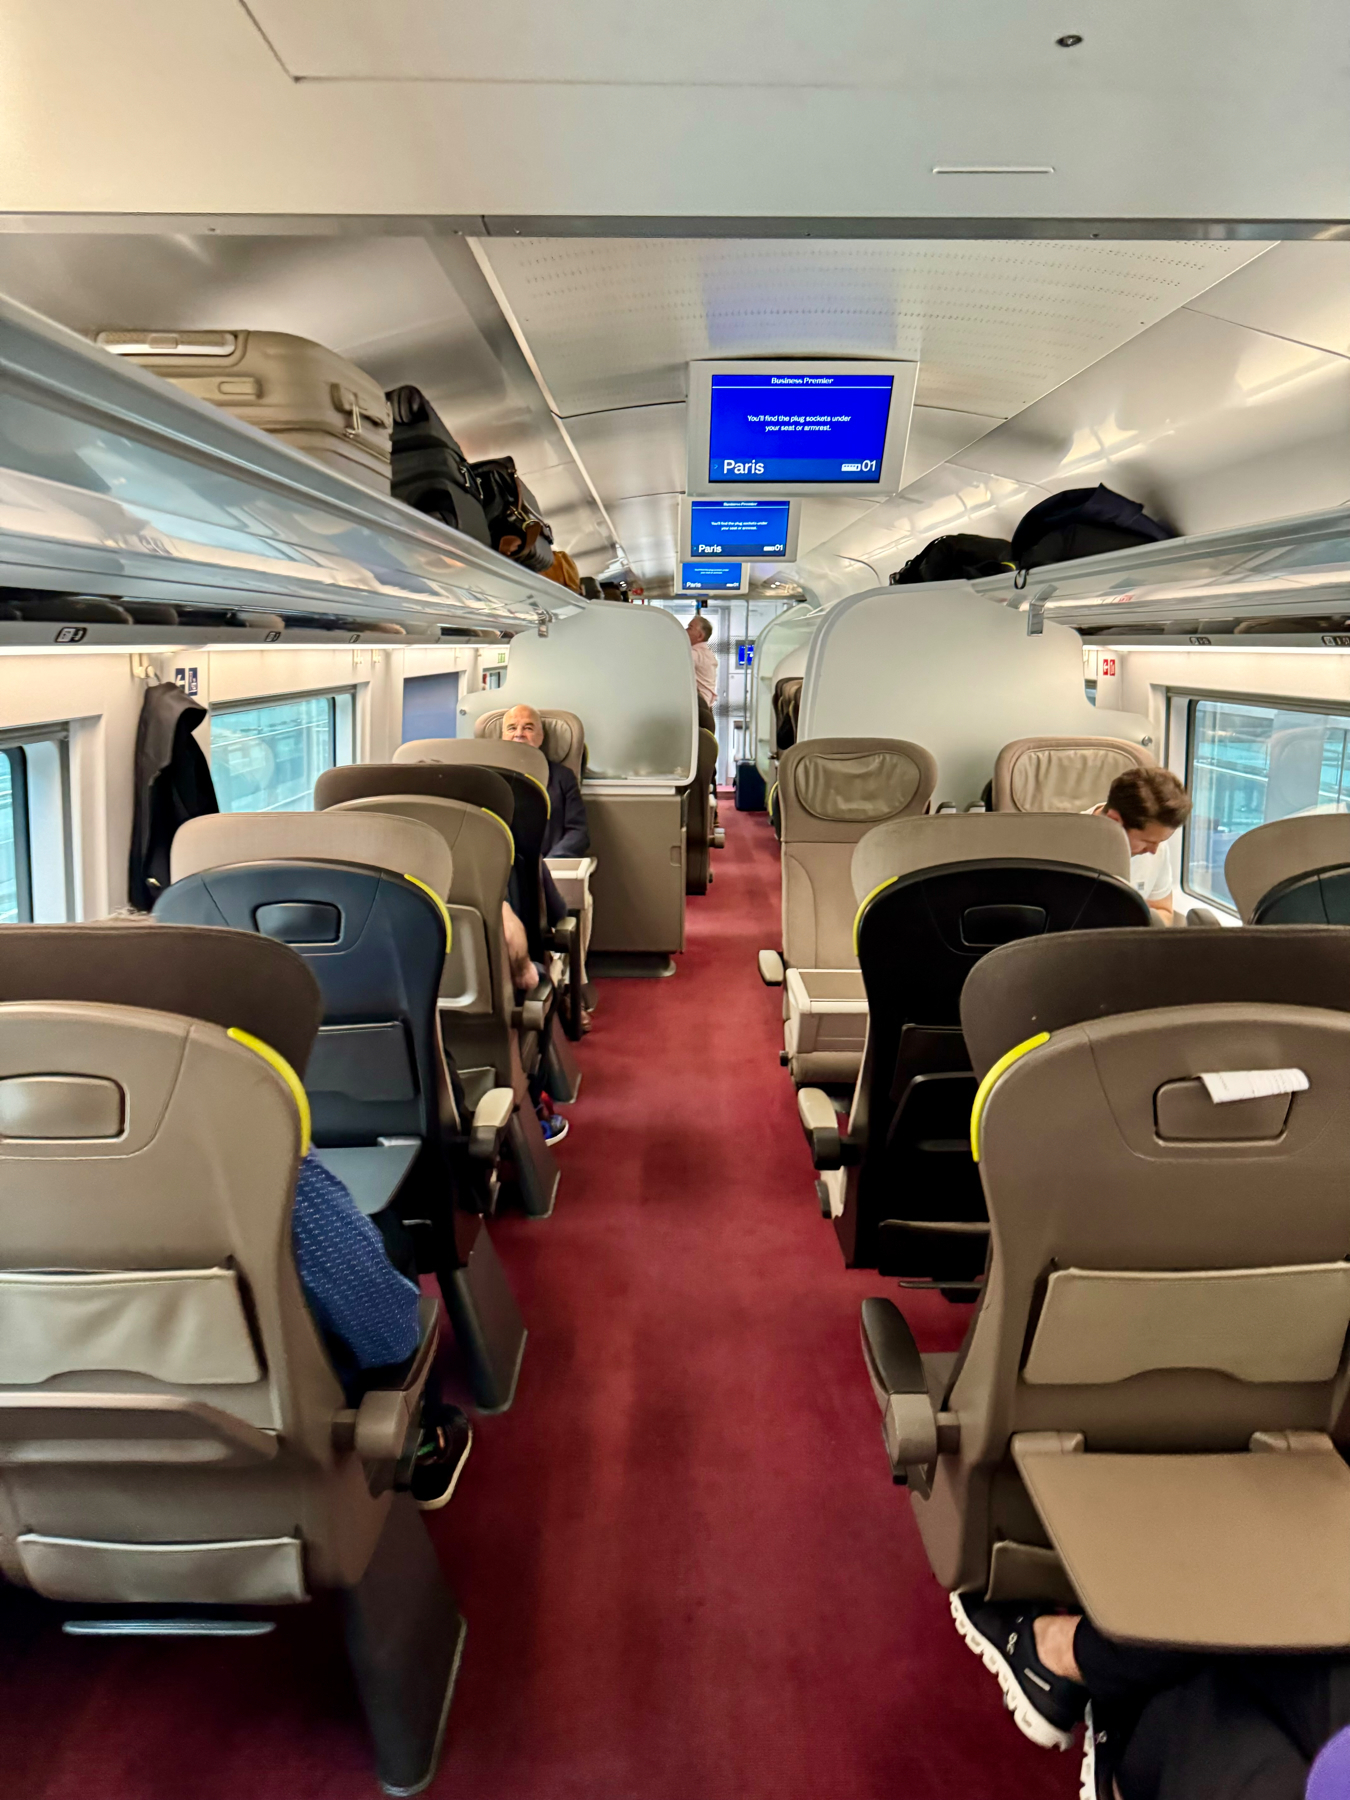 Interior of a train carriage with passengers seated and overhead luggage compartments, featuring comfortable seats and a digital display indicating the destination as Paris.